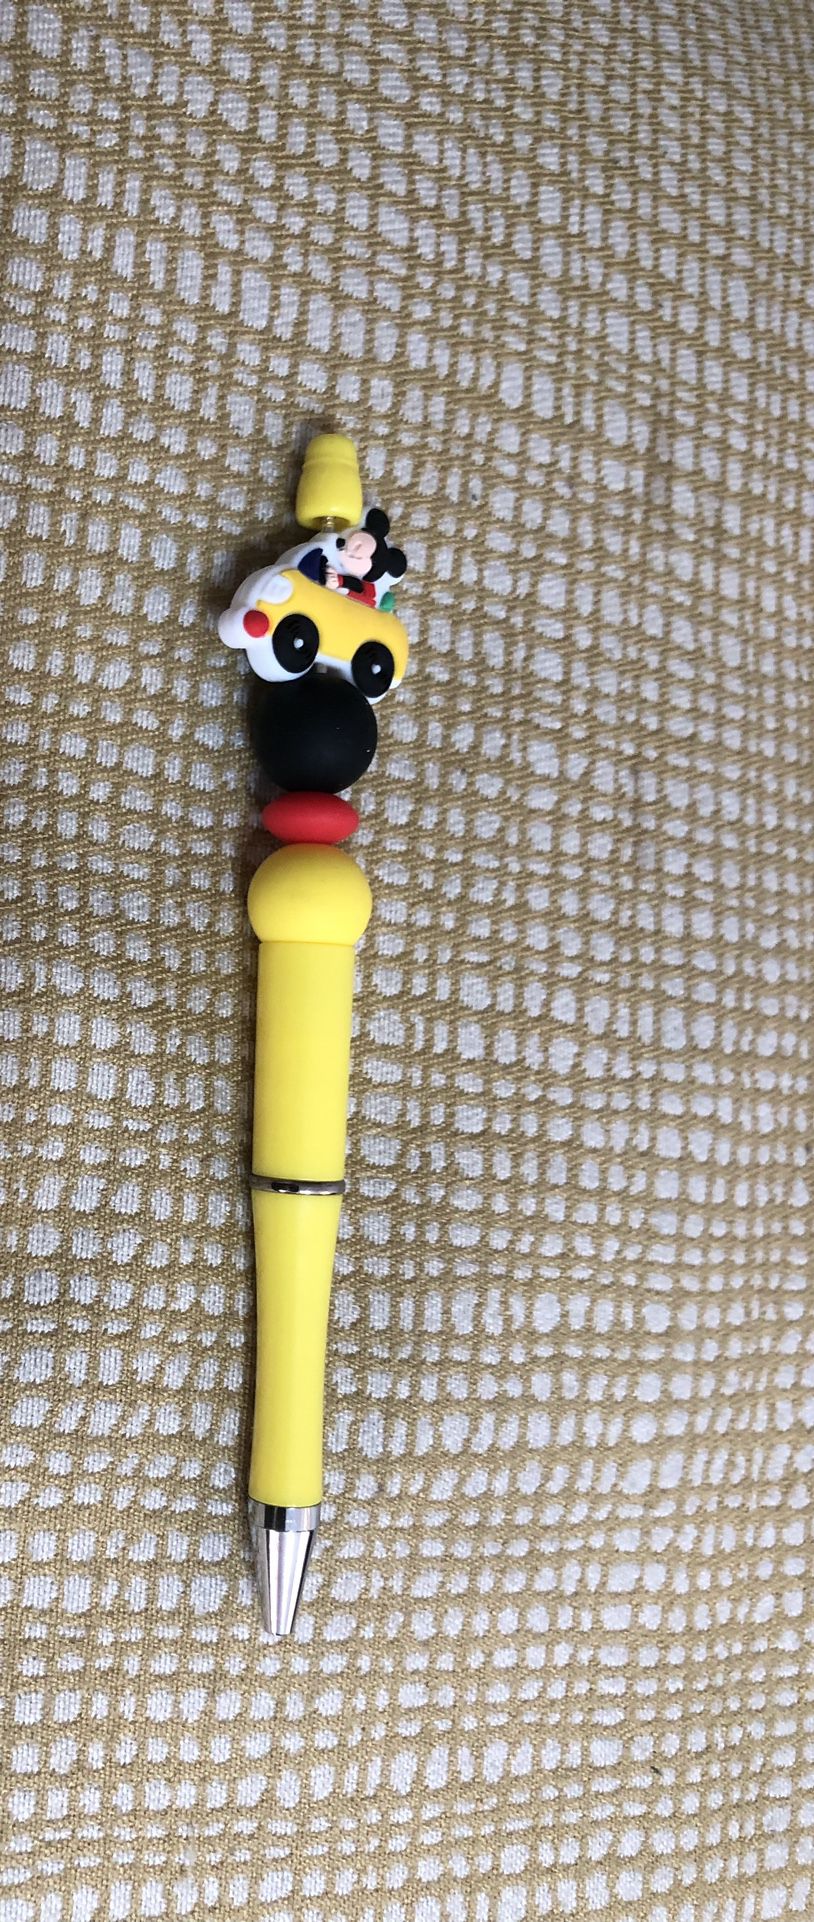 Disney Mickey Mouse beads pen . Color yellow  . Size 6”LX 1” W